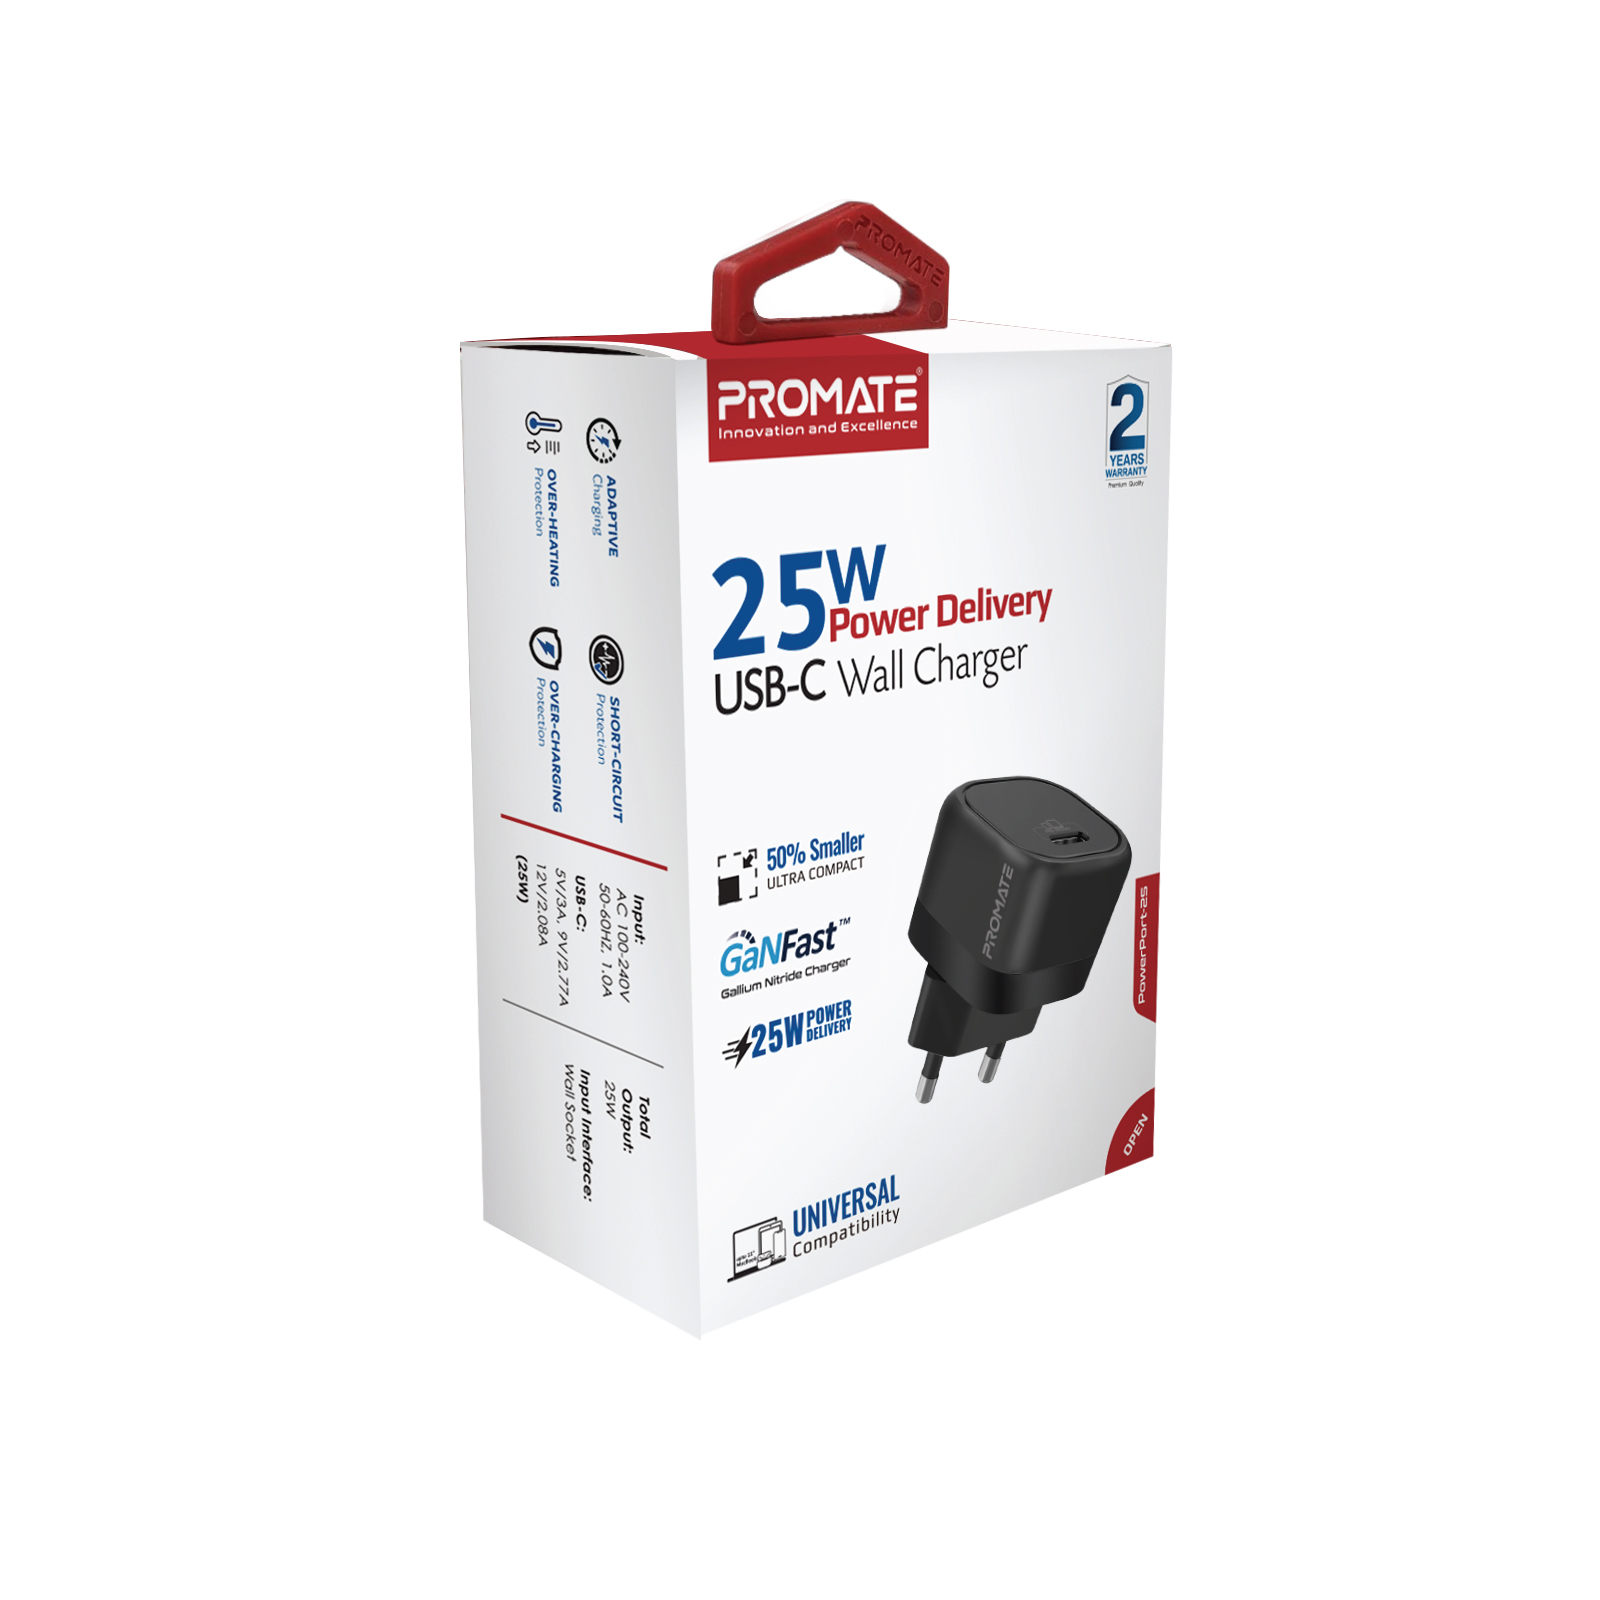 Зарядно 220V ProMate,POWERPORT-25, 25W Power Delivery USB-C Wall Charger • Adaptive Fast Charging Power Delivery  • Surge Protection • Automatic Voltage Regulation, Черен